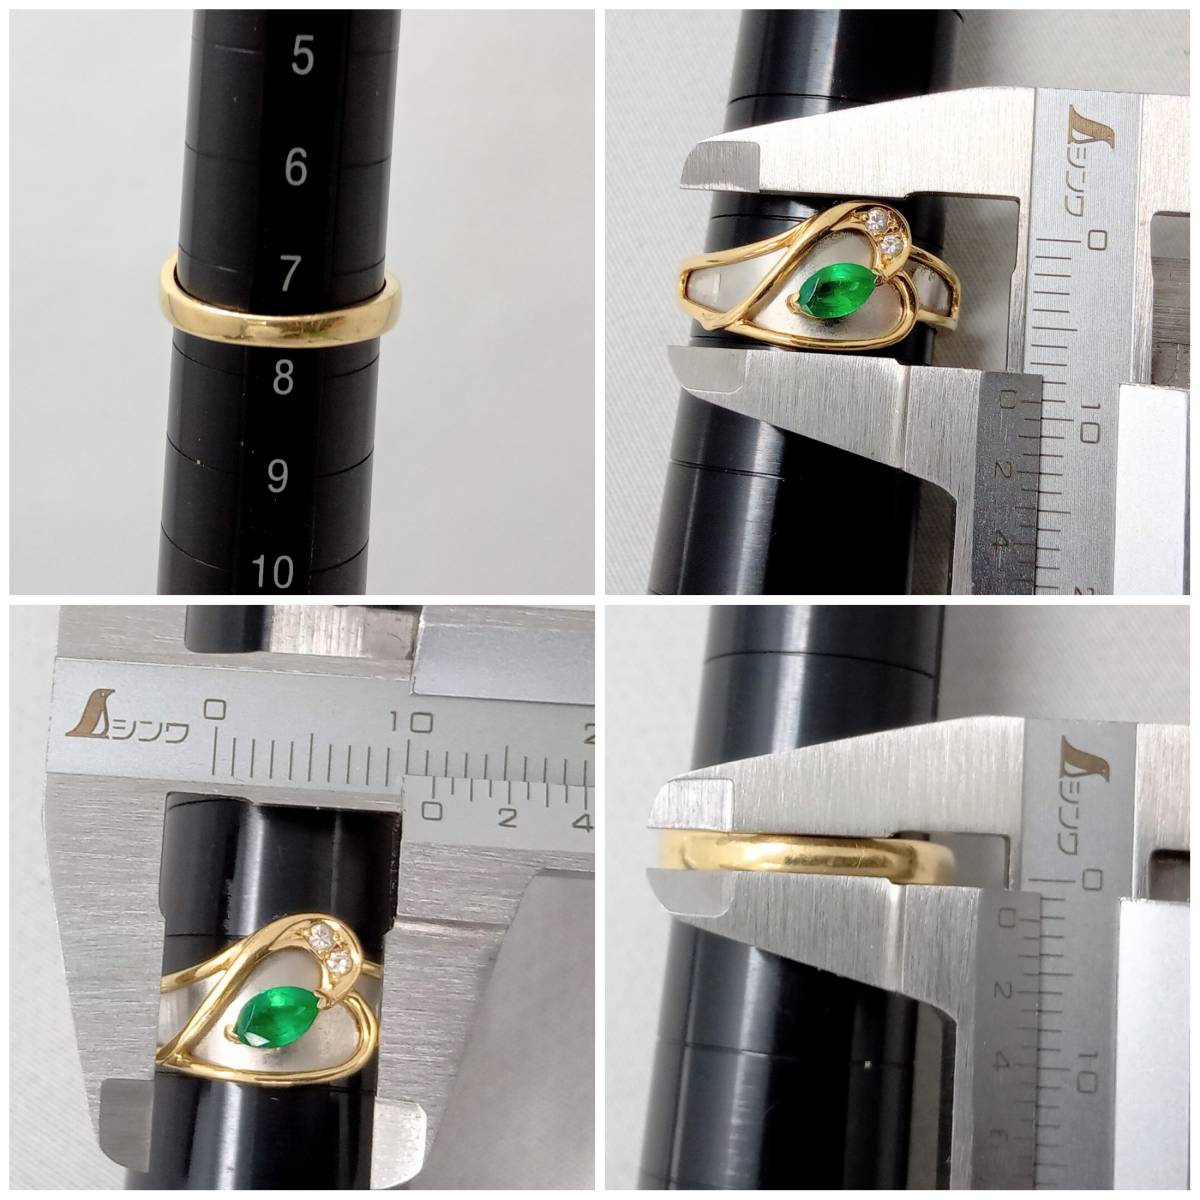  natural emerald K18|Pt900 ring diamond 0.02ct emerald 0.21ct 8 number 2.6gso-ting attaching 